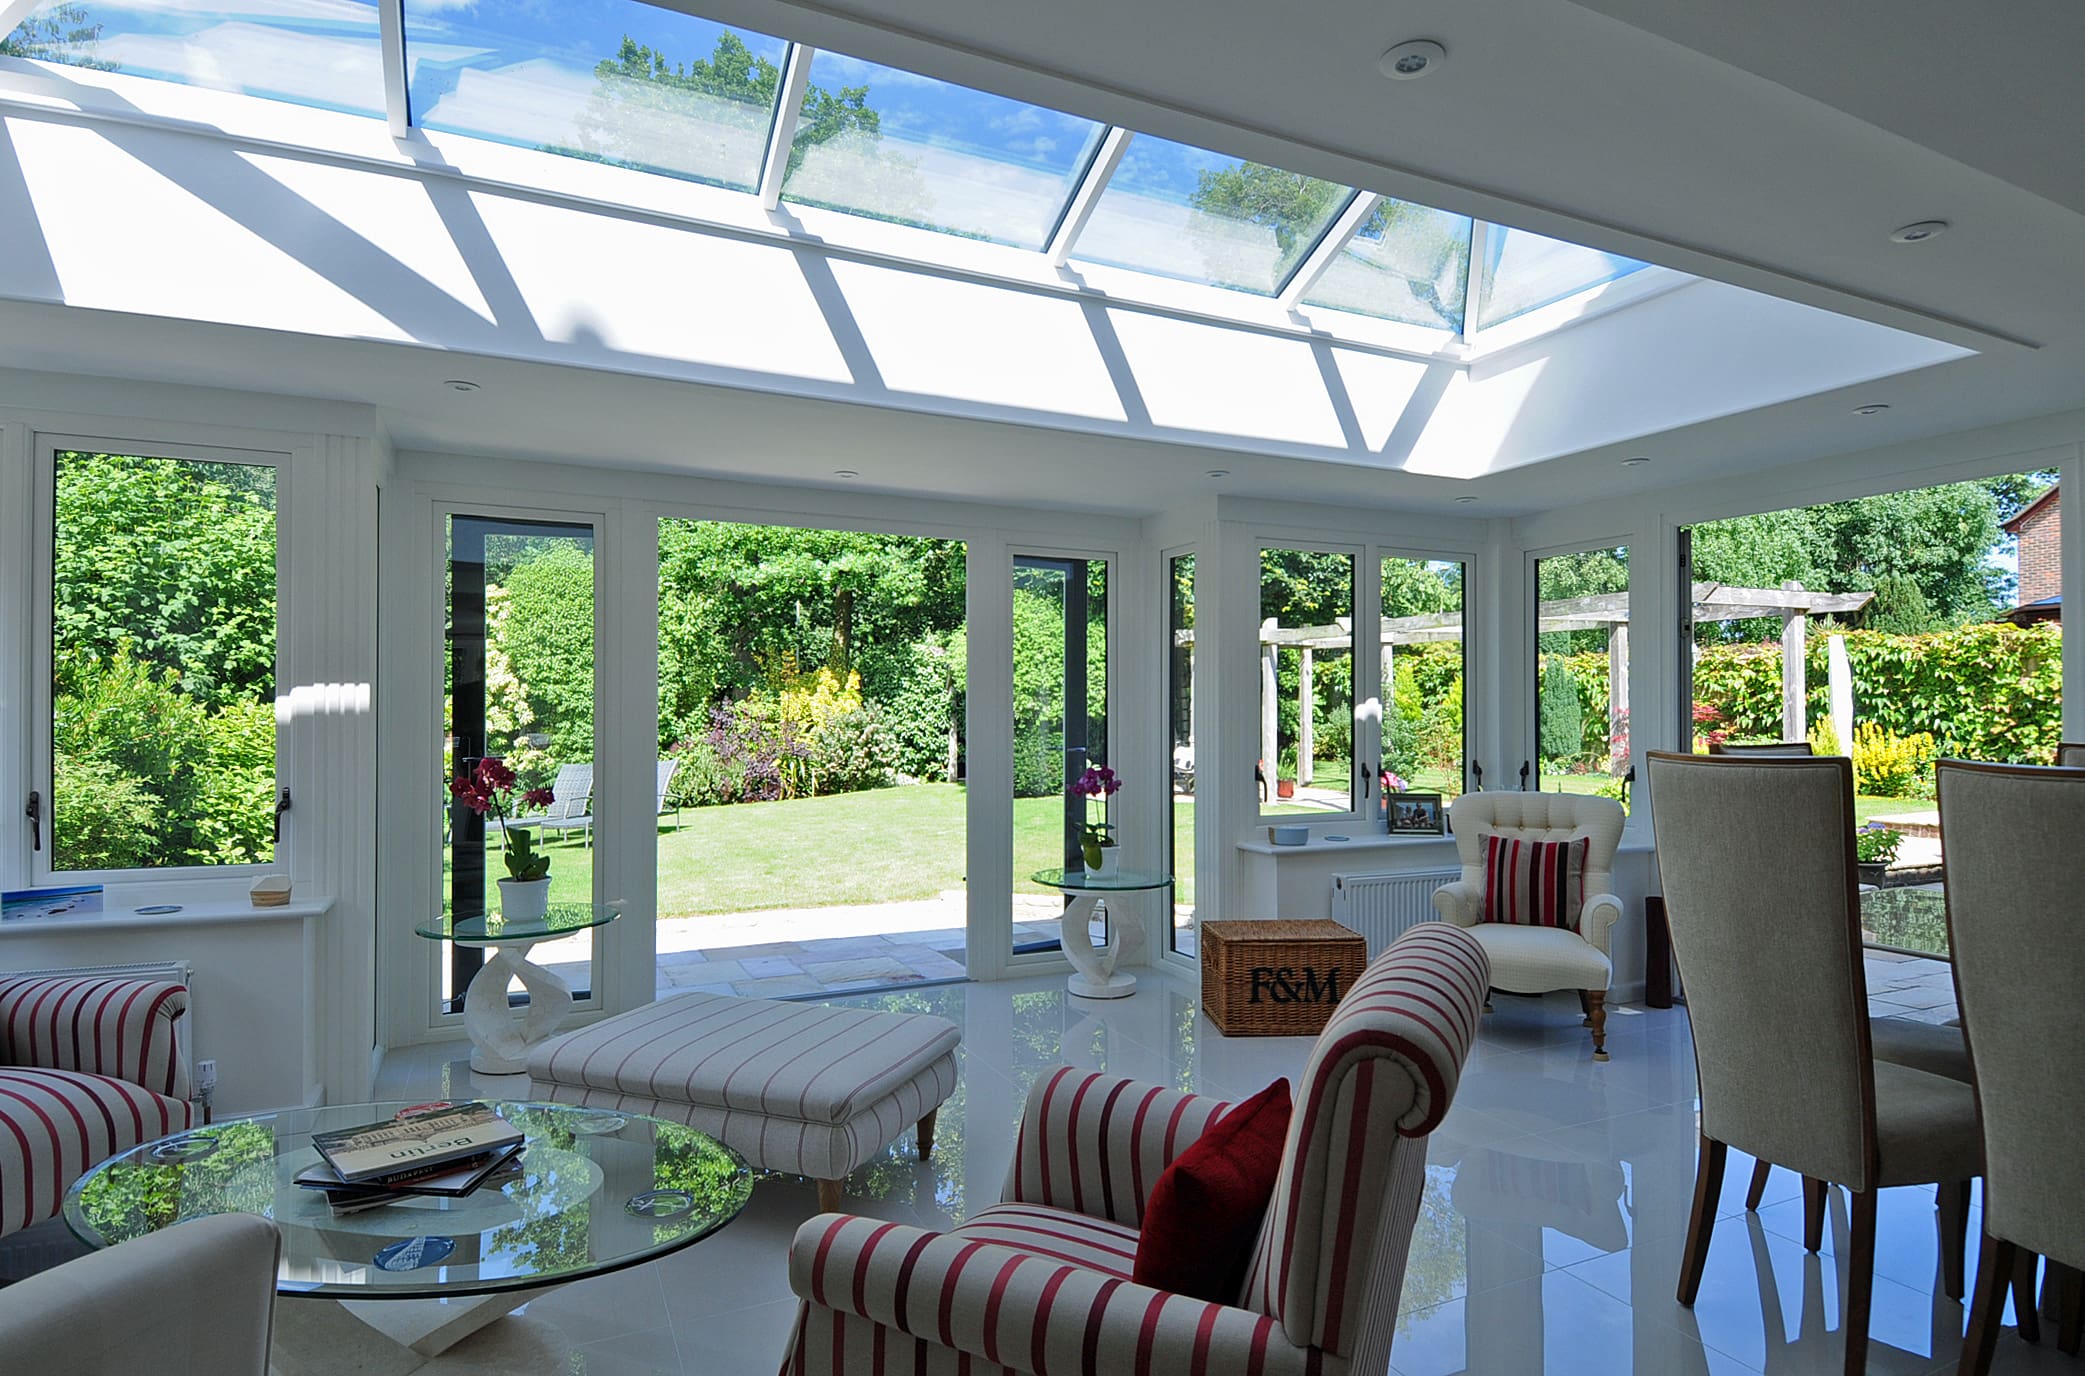 Beautiful sitting room with striped armchairs and double glazed french doors and a roof lantern.